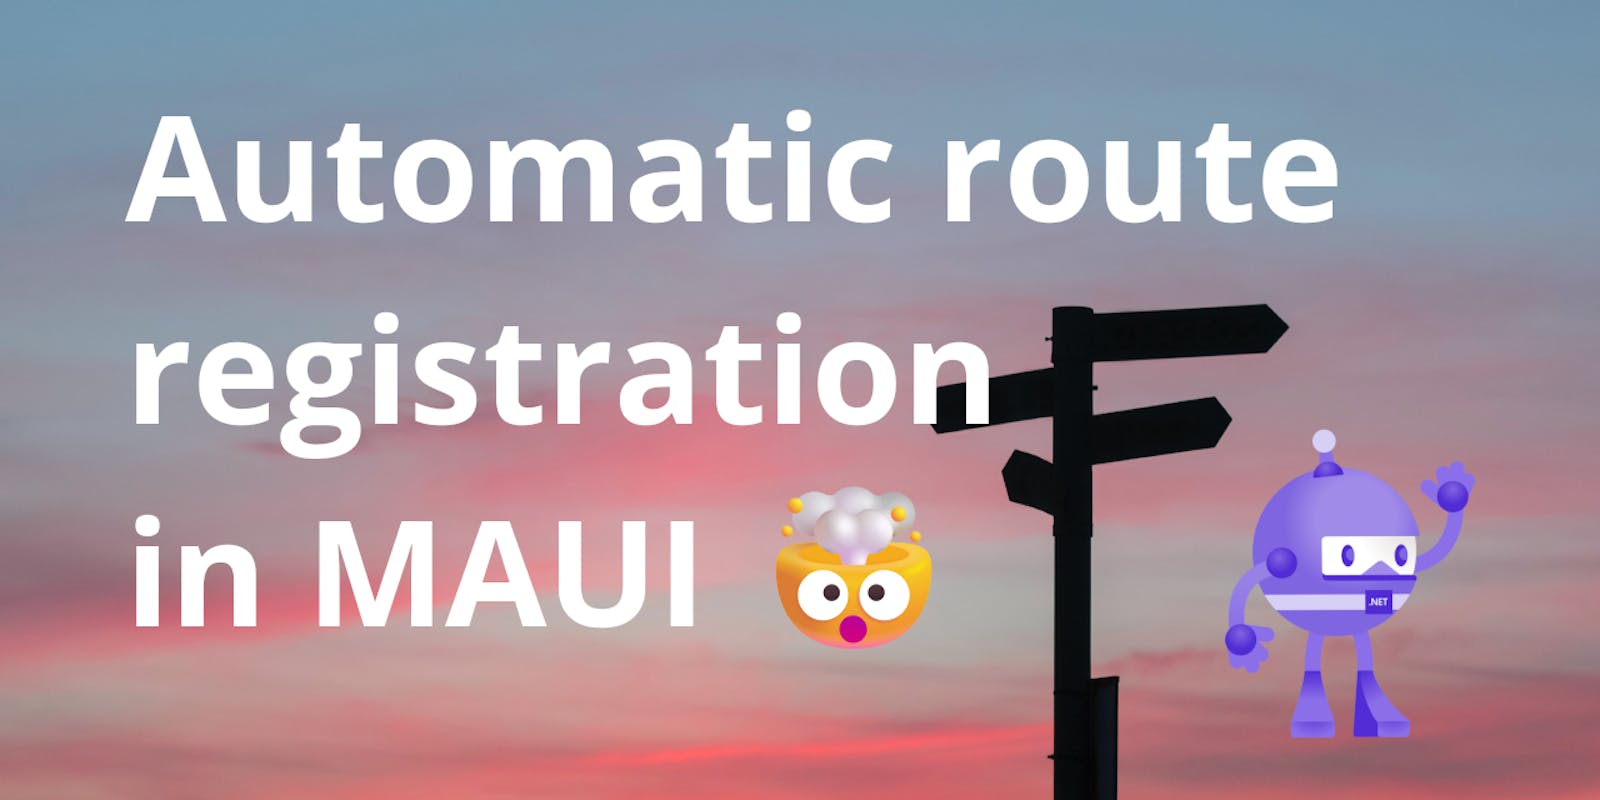 Add automatic route registration to your .NET MAUI app